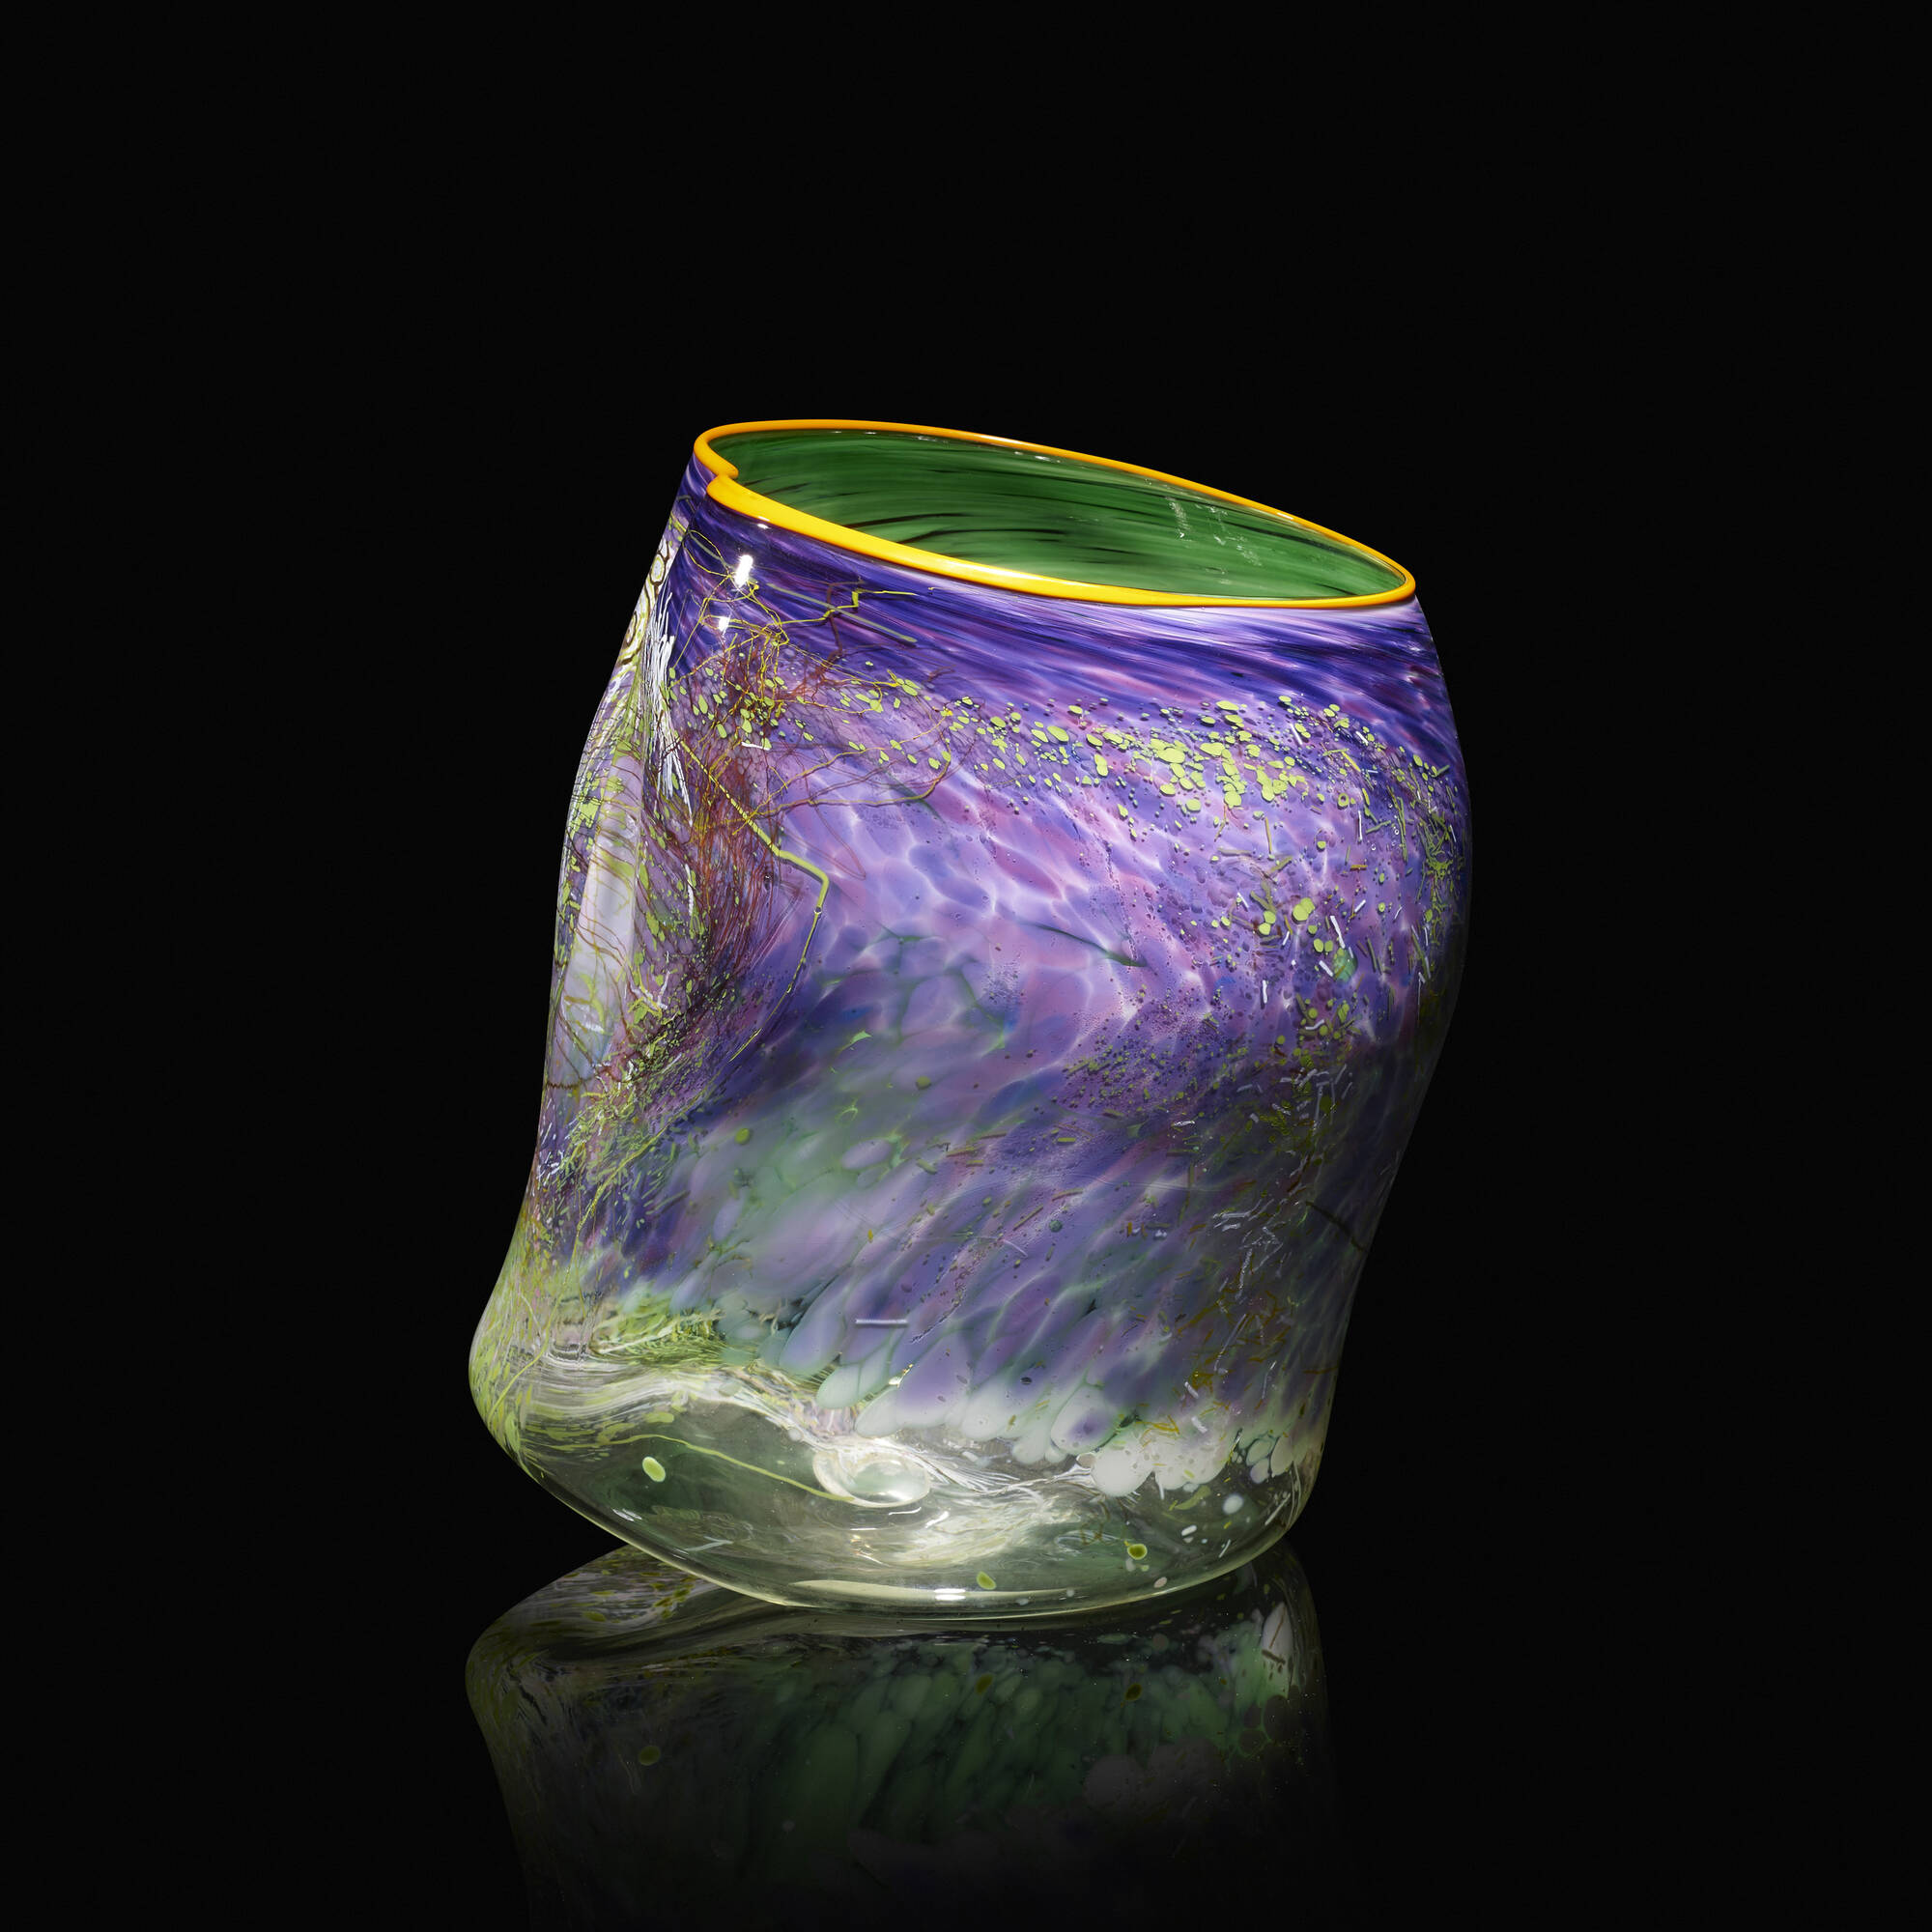 104_1_contemporary_glass_june_2016_dale_chihuly_purple_lake_soft ...